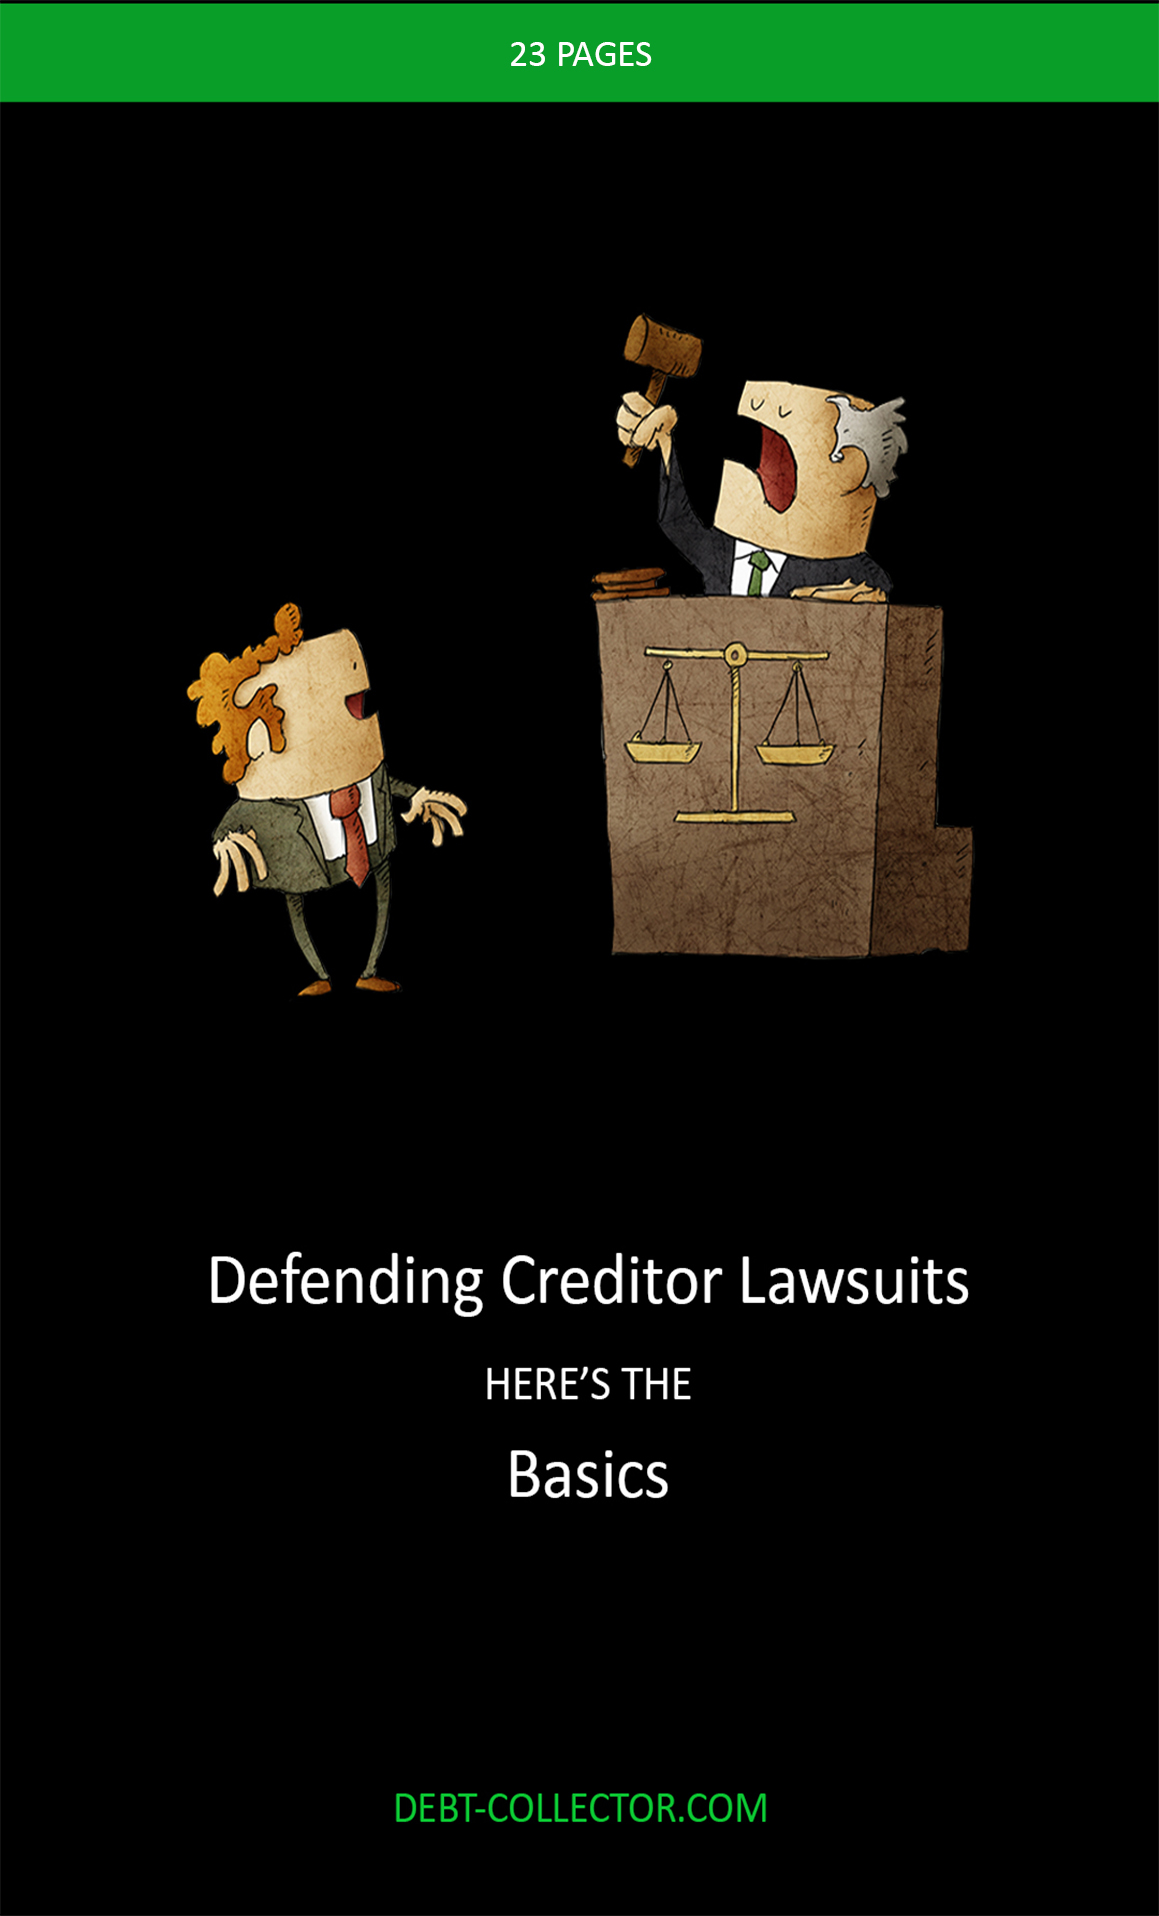 cover image: Basics for Defending Creditor Lawsuits pdf, 23 pages